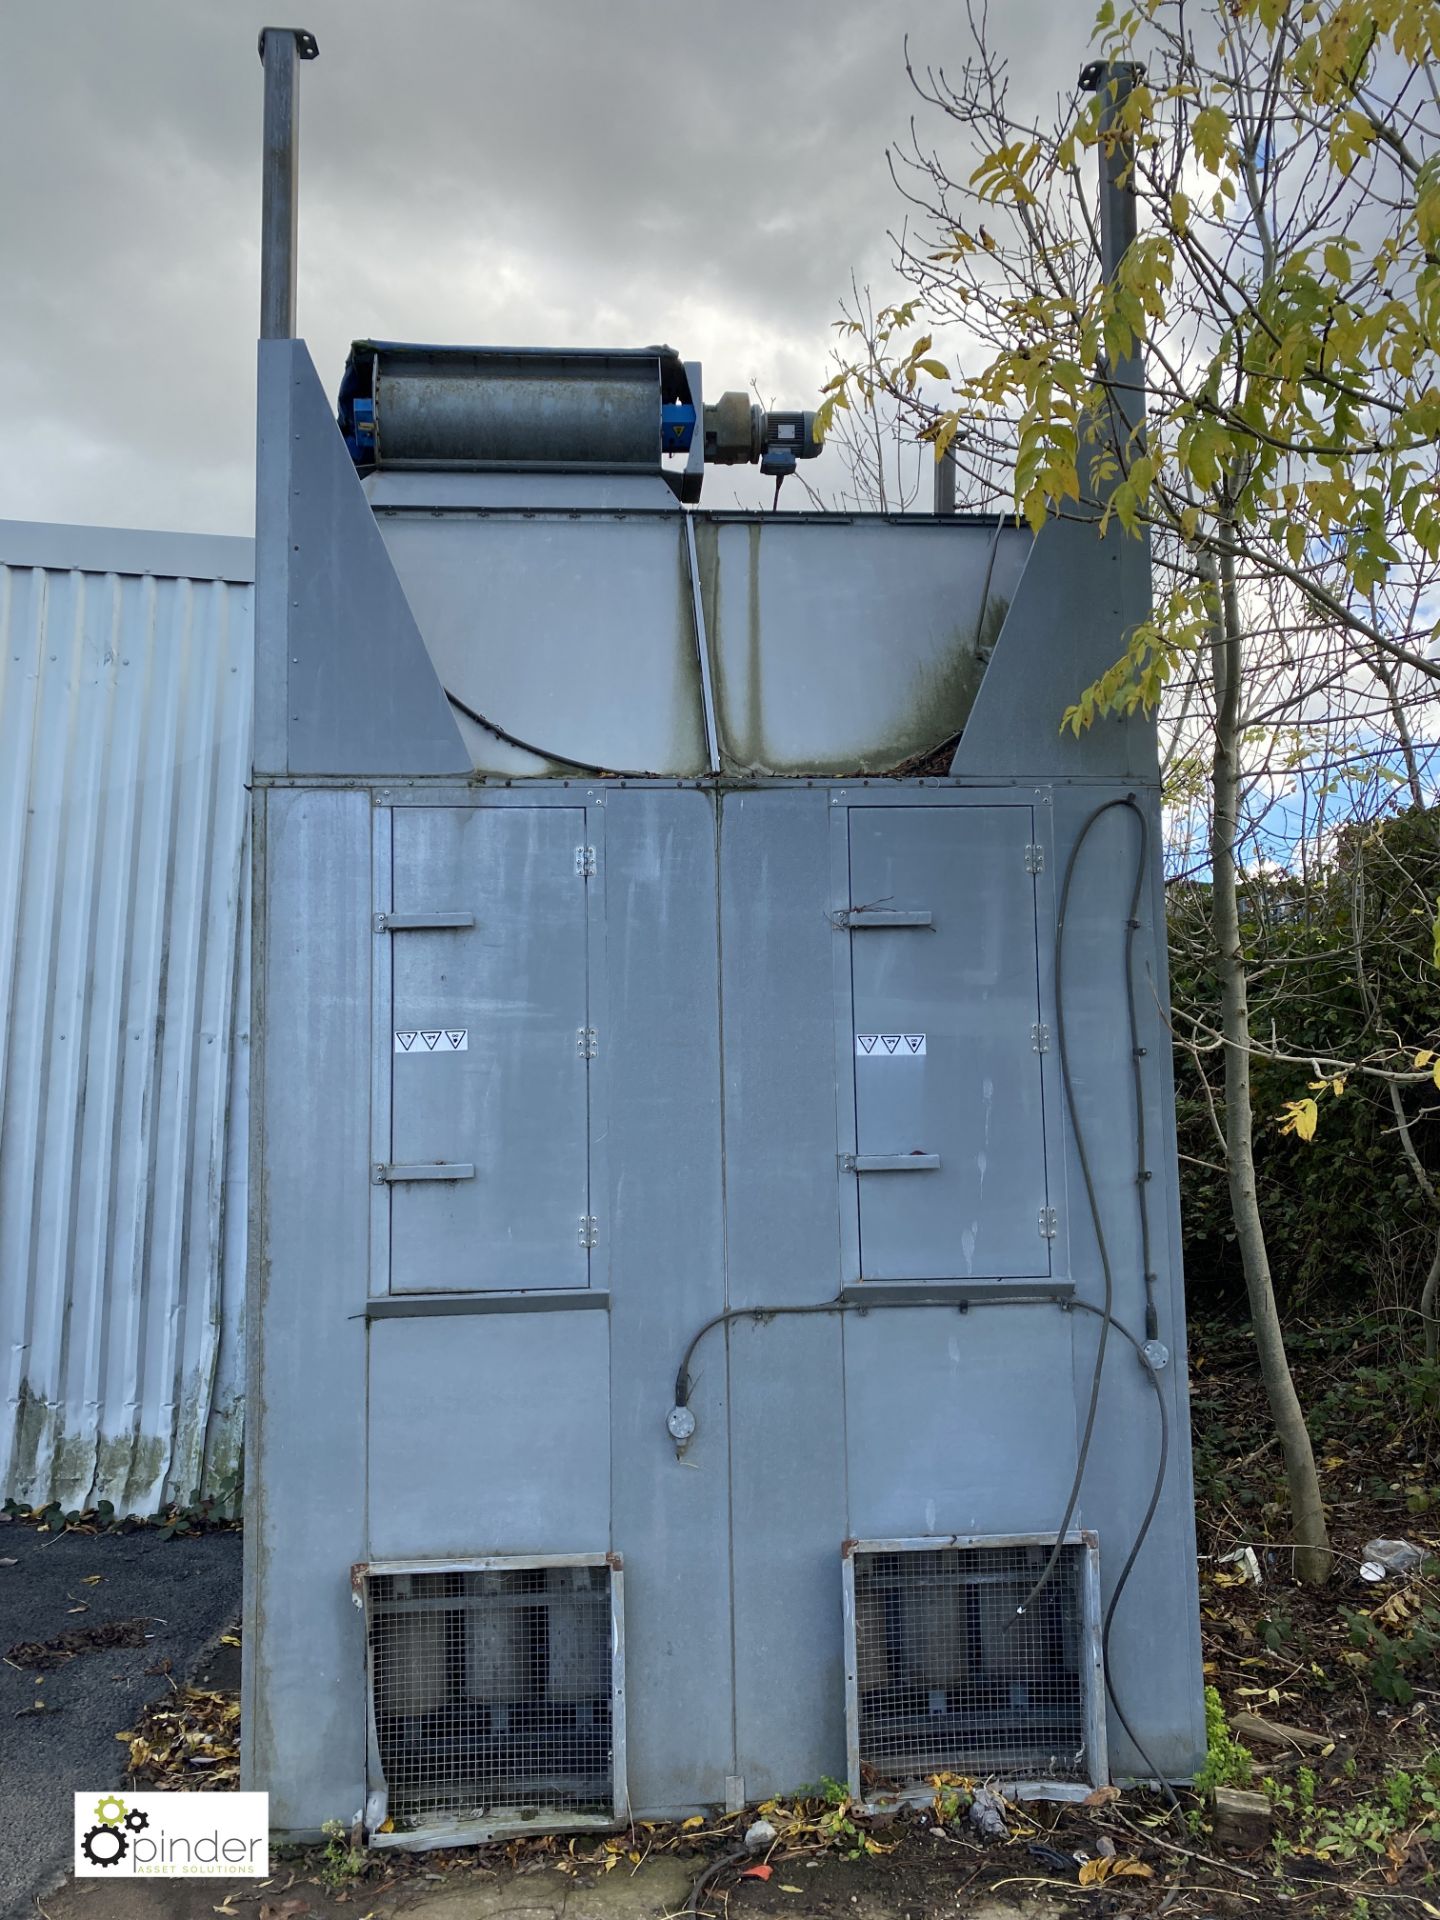 Nordfab DPE Ltd galvanised Dust Extraction Unit, 2400mm x 2400mm x 3800mm approx. tall (LOCATION: - Image 2 of 5